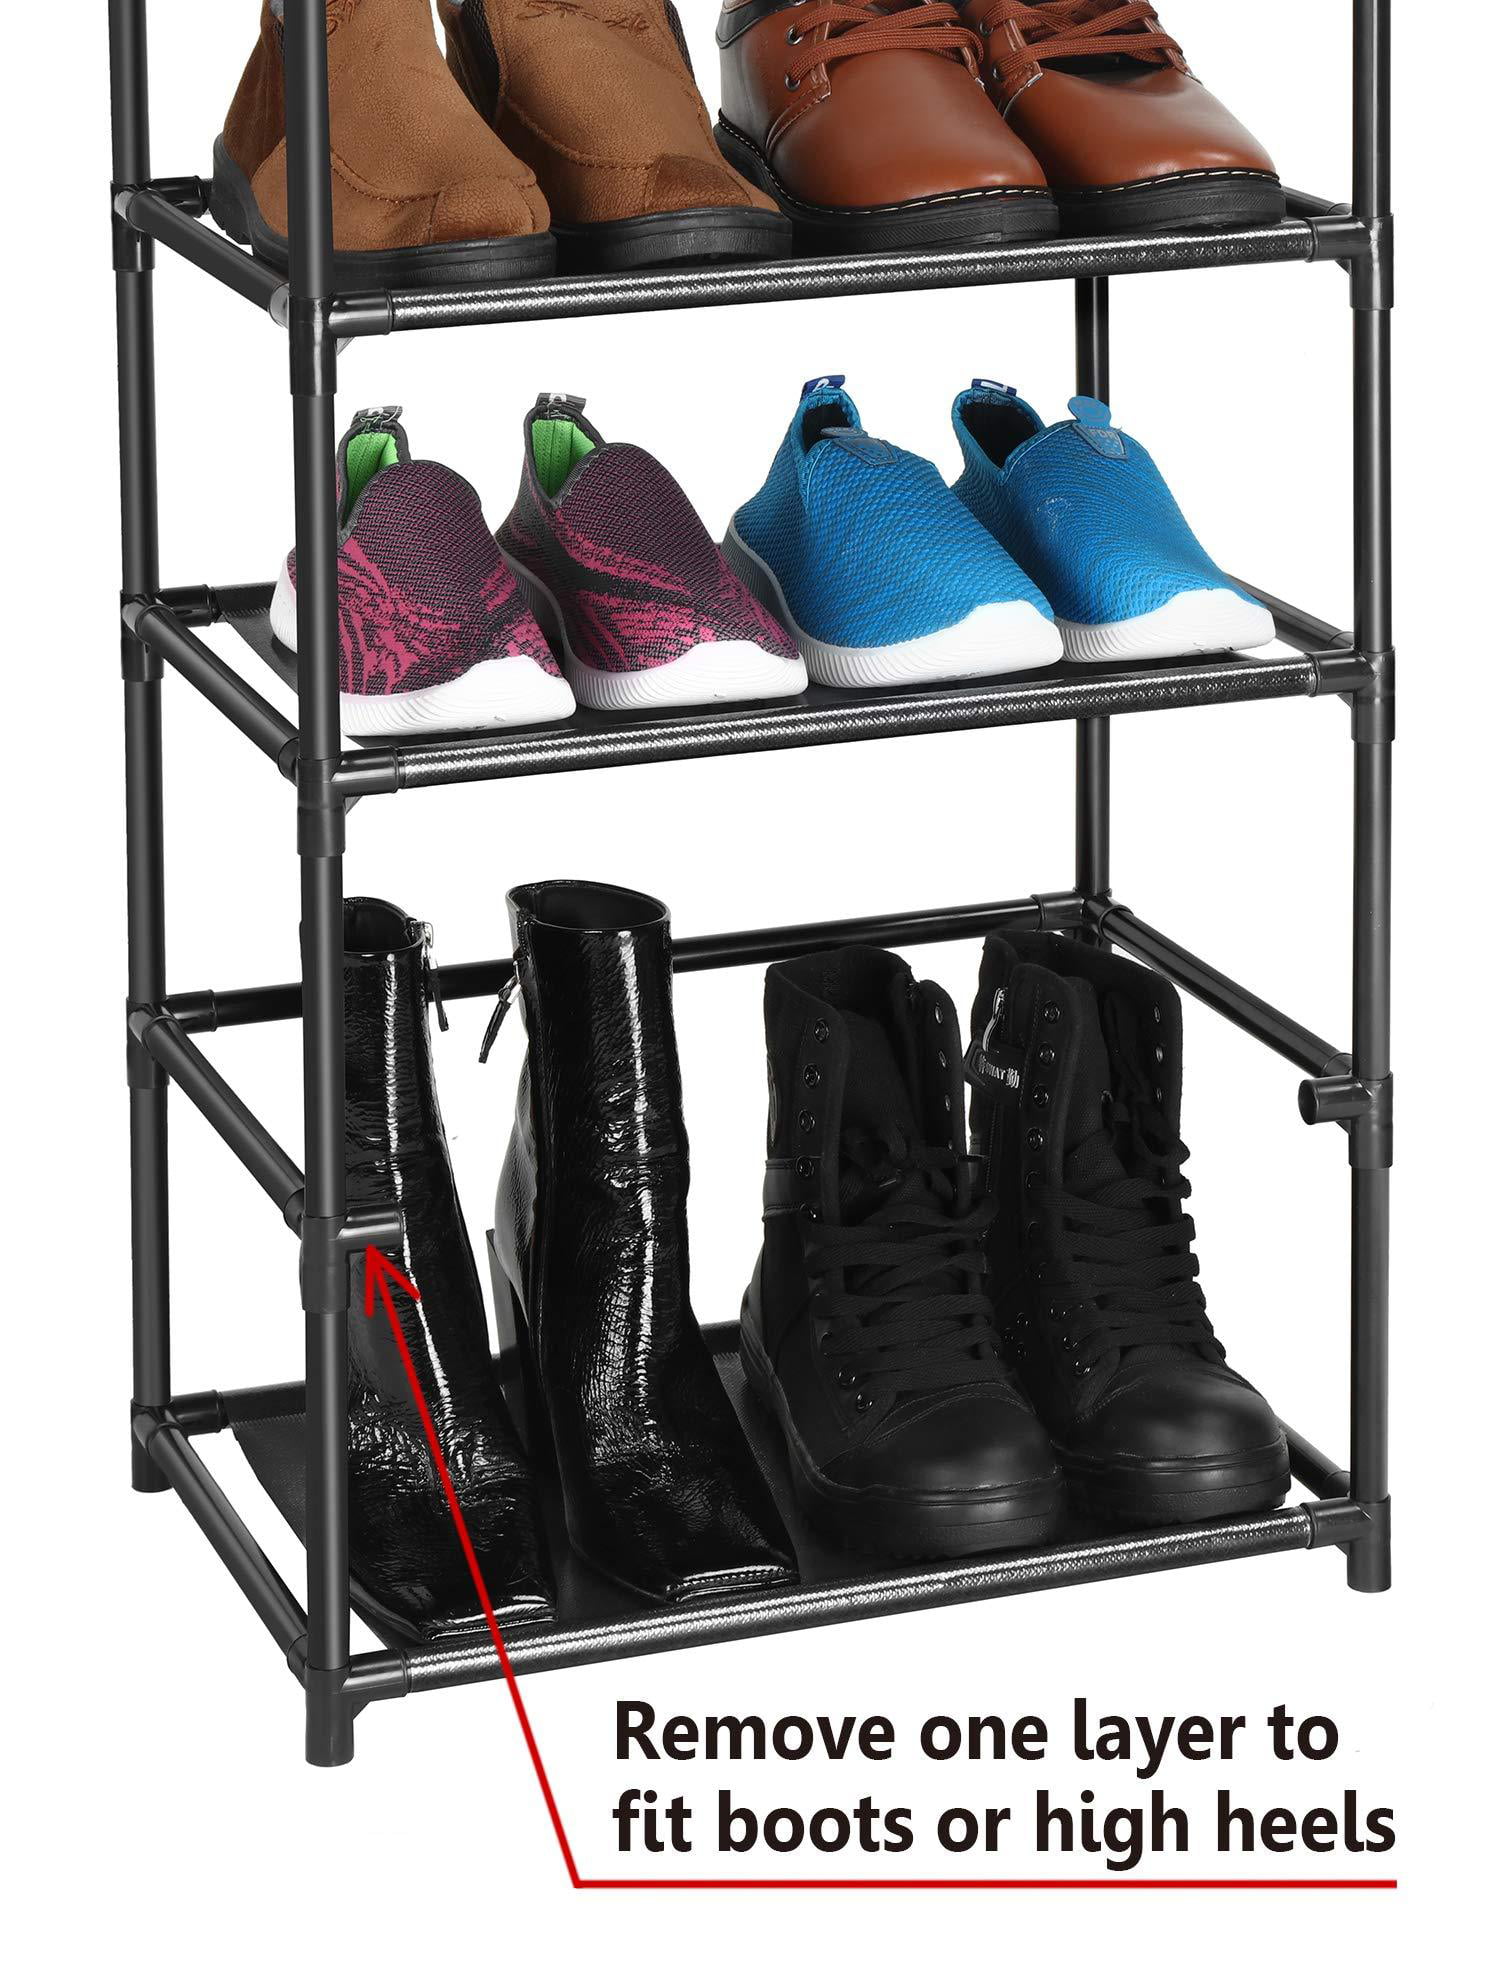 Z&L HOUSE 8 Tier Shoe Rack Narrow, Sturdy Shoe Rack Tall Store 16-20 Pairs  of Shoes, Stackable Shoe Shelf for Closet Entryway to Increase The Use of